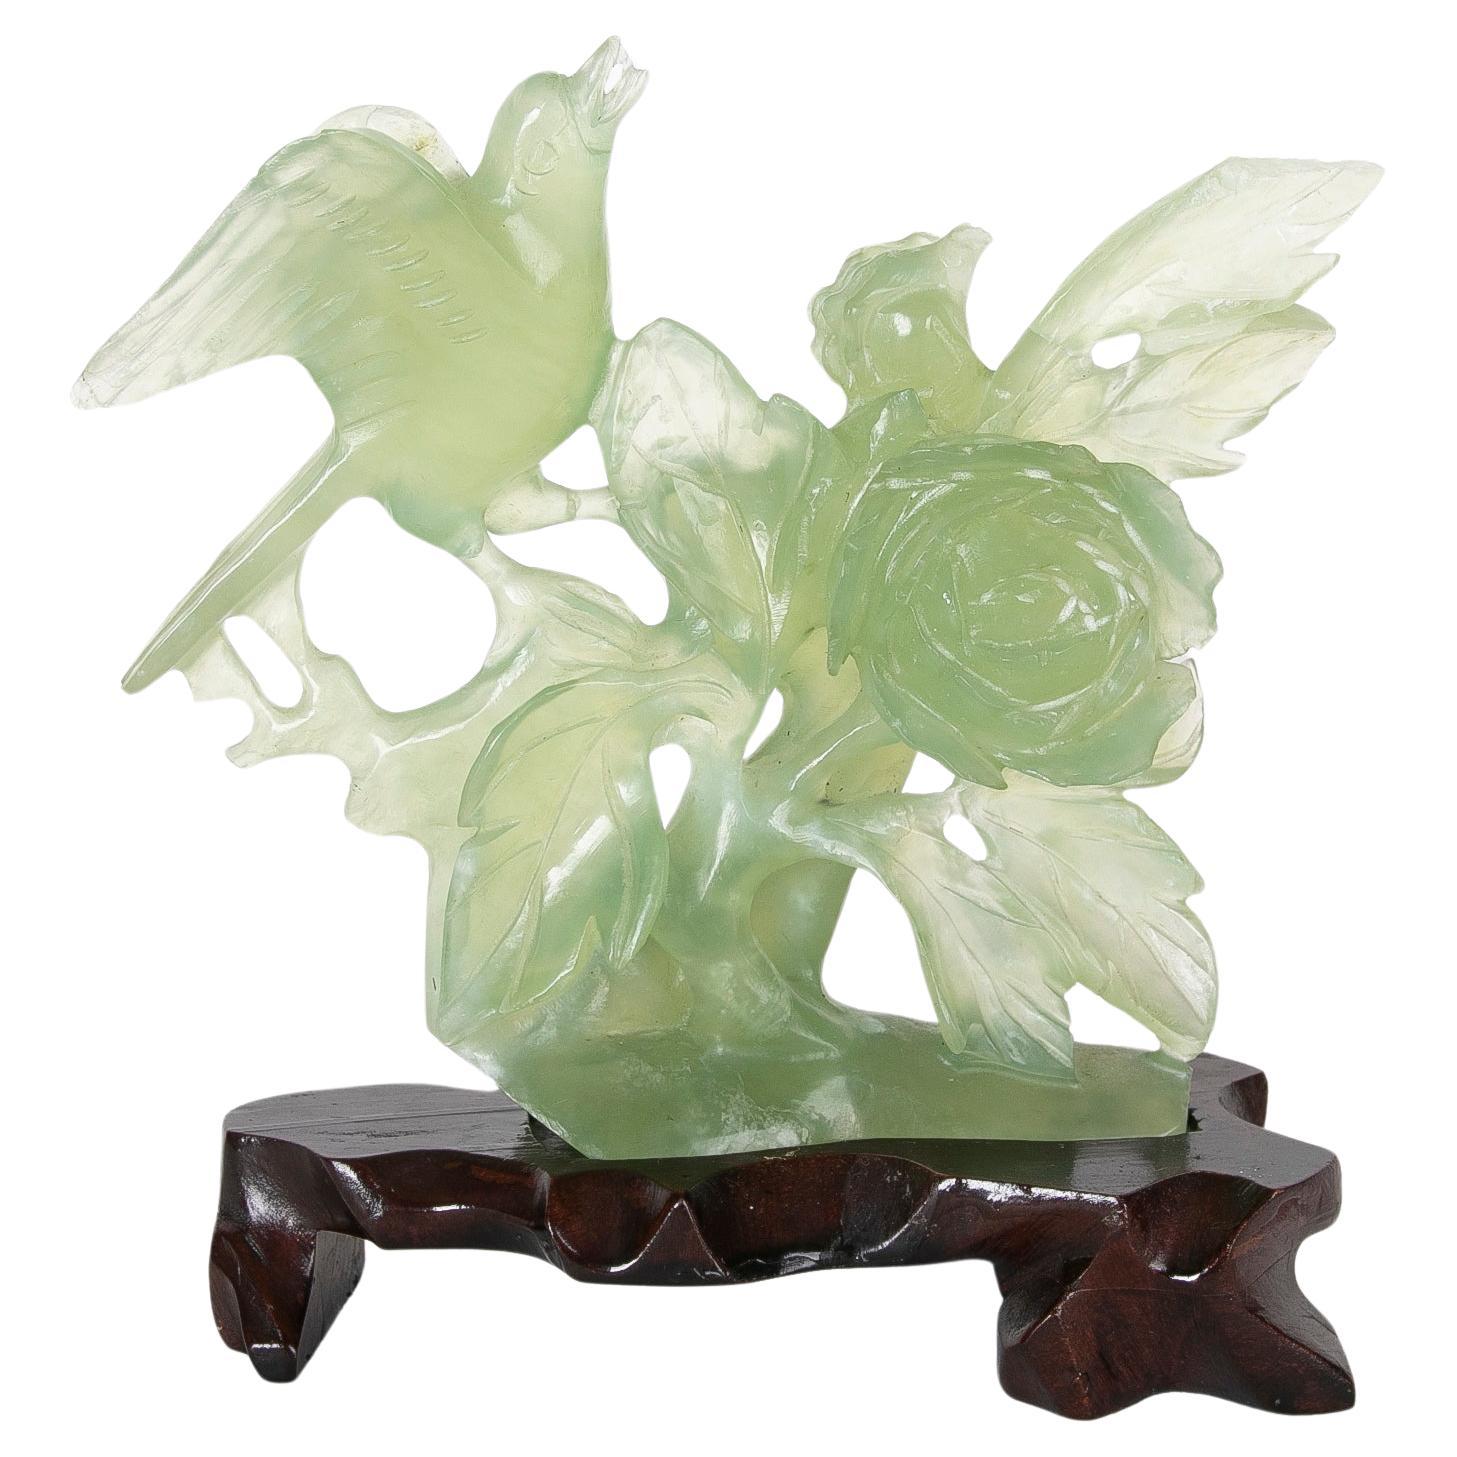 Hand-Carved Bird Jadeite Sculpture with Flowers and Wooden Base